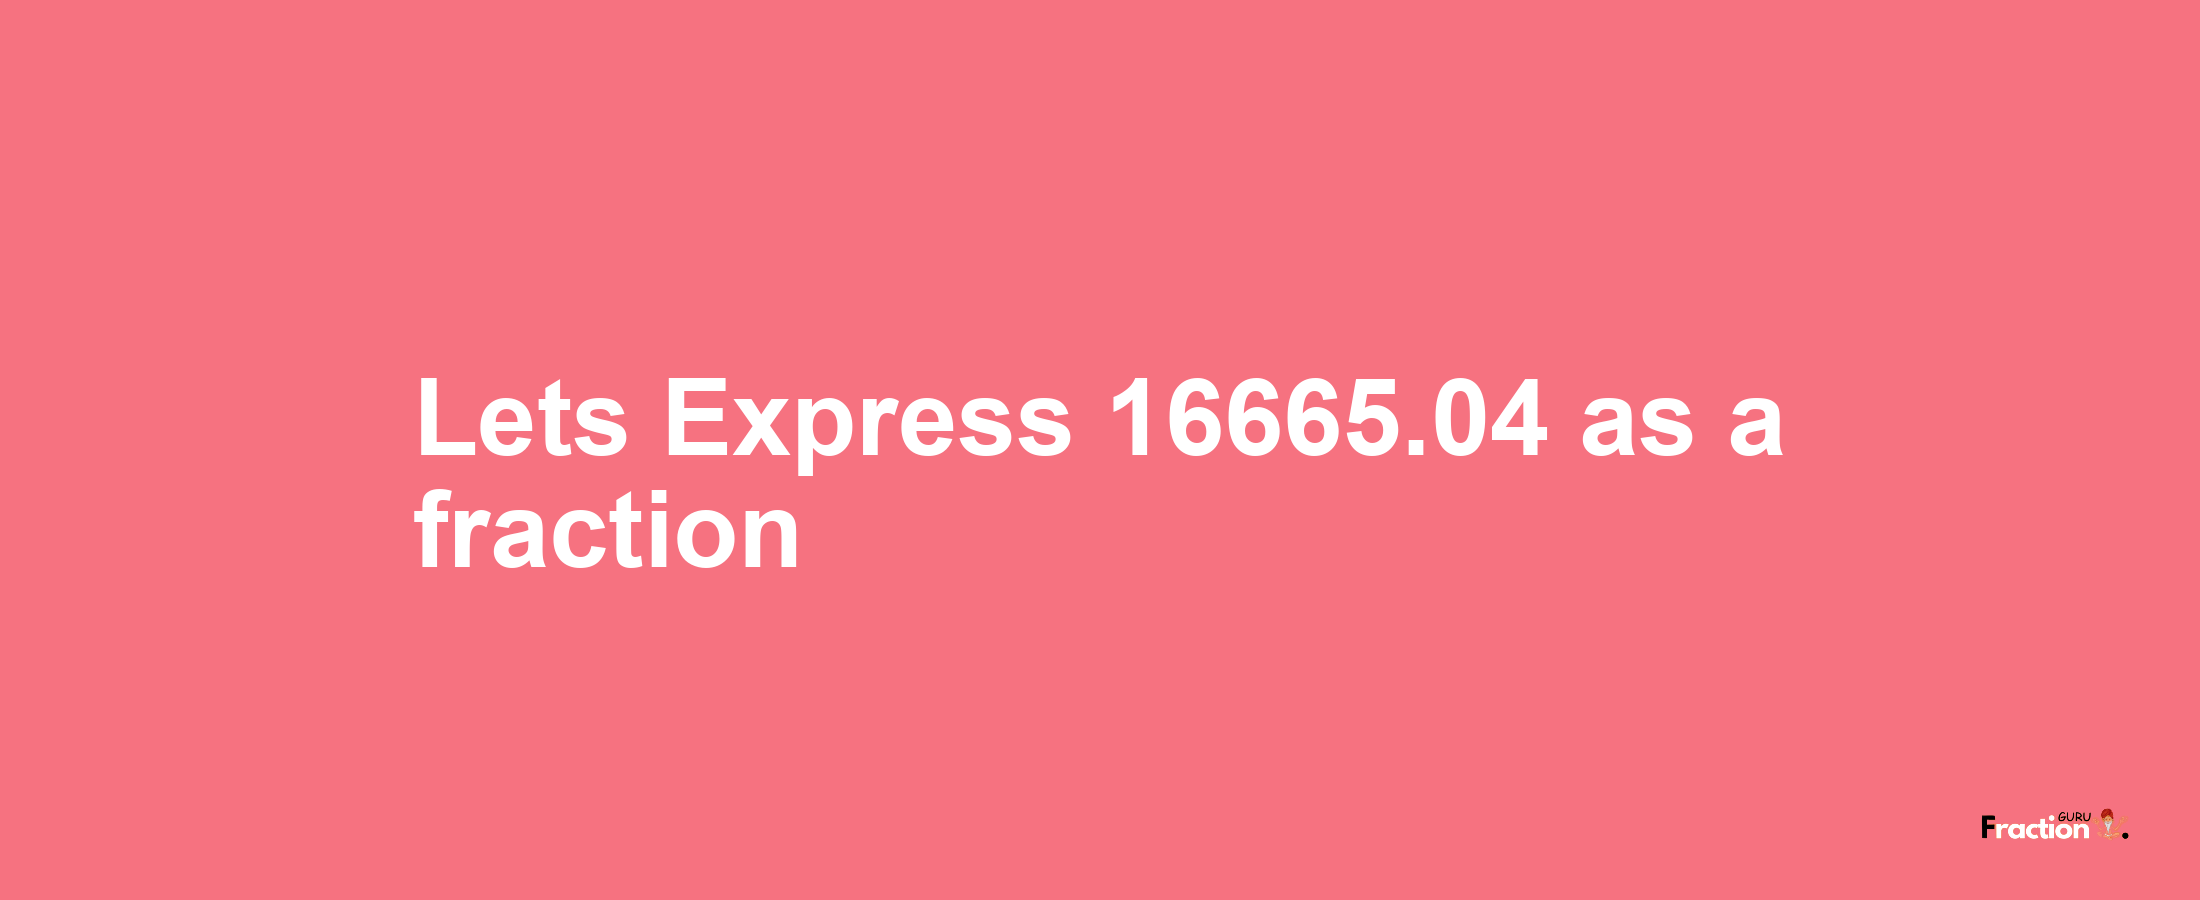 Lets Express 16665.04 as afraction